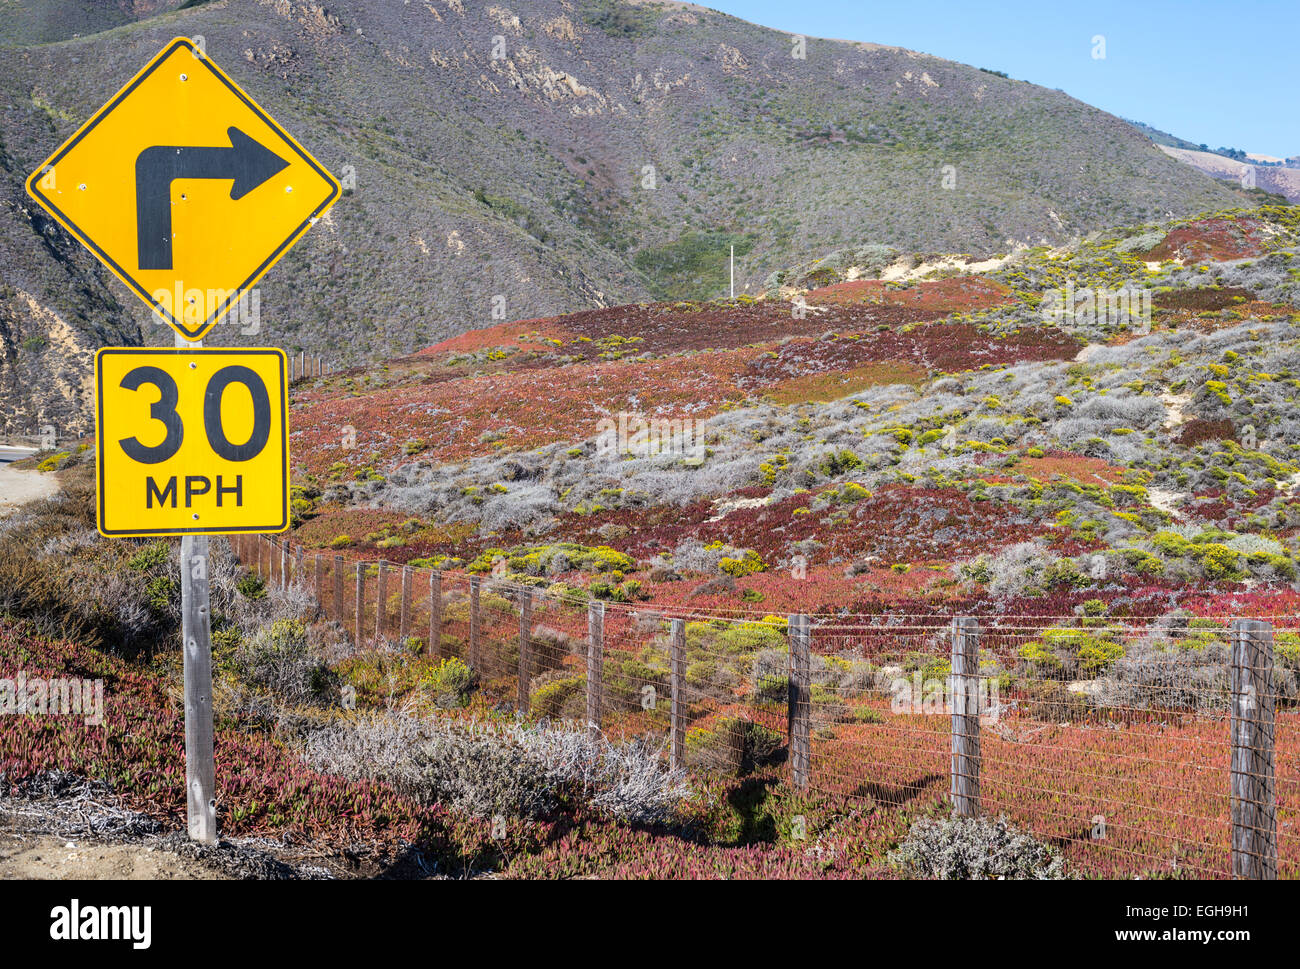 Road sign and colorful chaparral. Big Sur, California, United States. Stock Photo